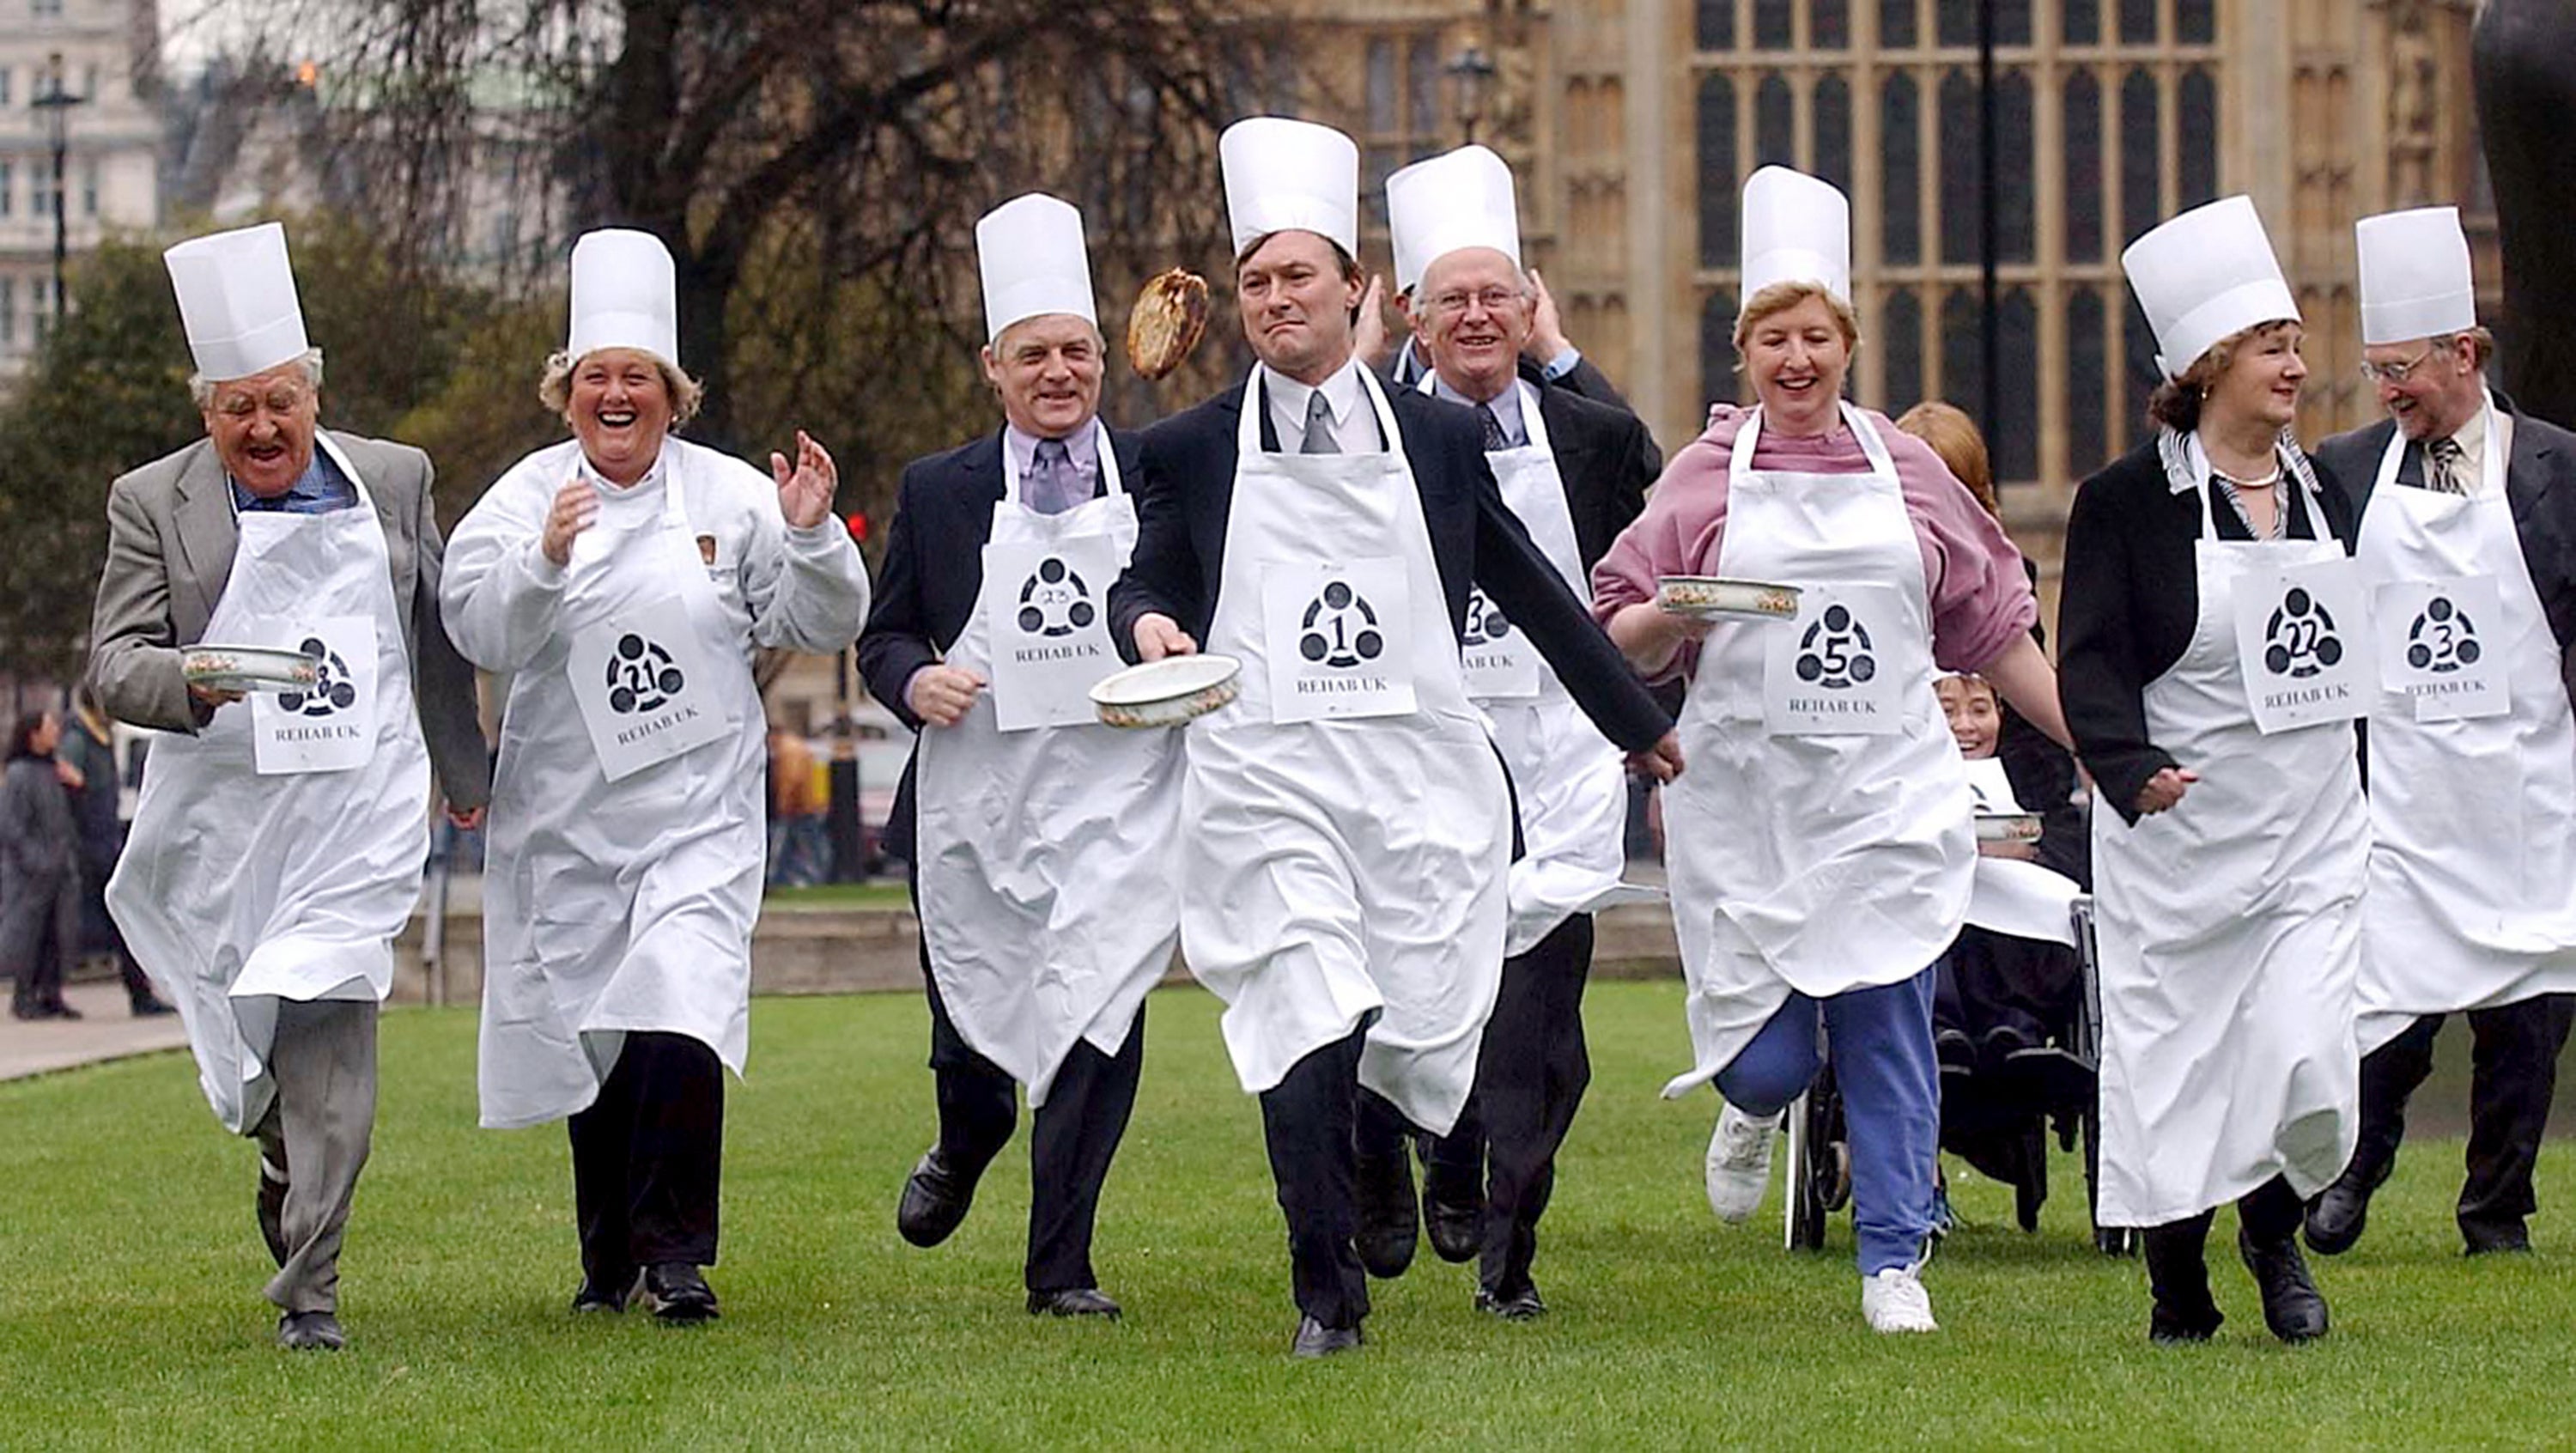 David Amess MP (4th left) leads the way as members of the House of Commons and the House of Lords battle it out in a pancake race yards from Parliament